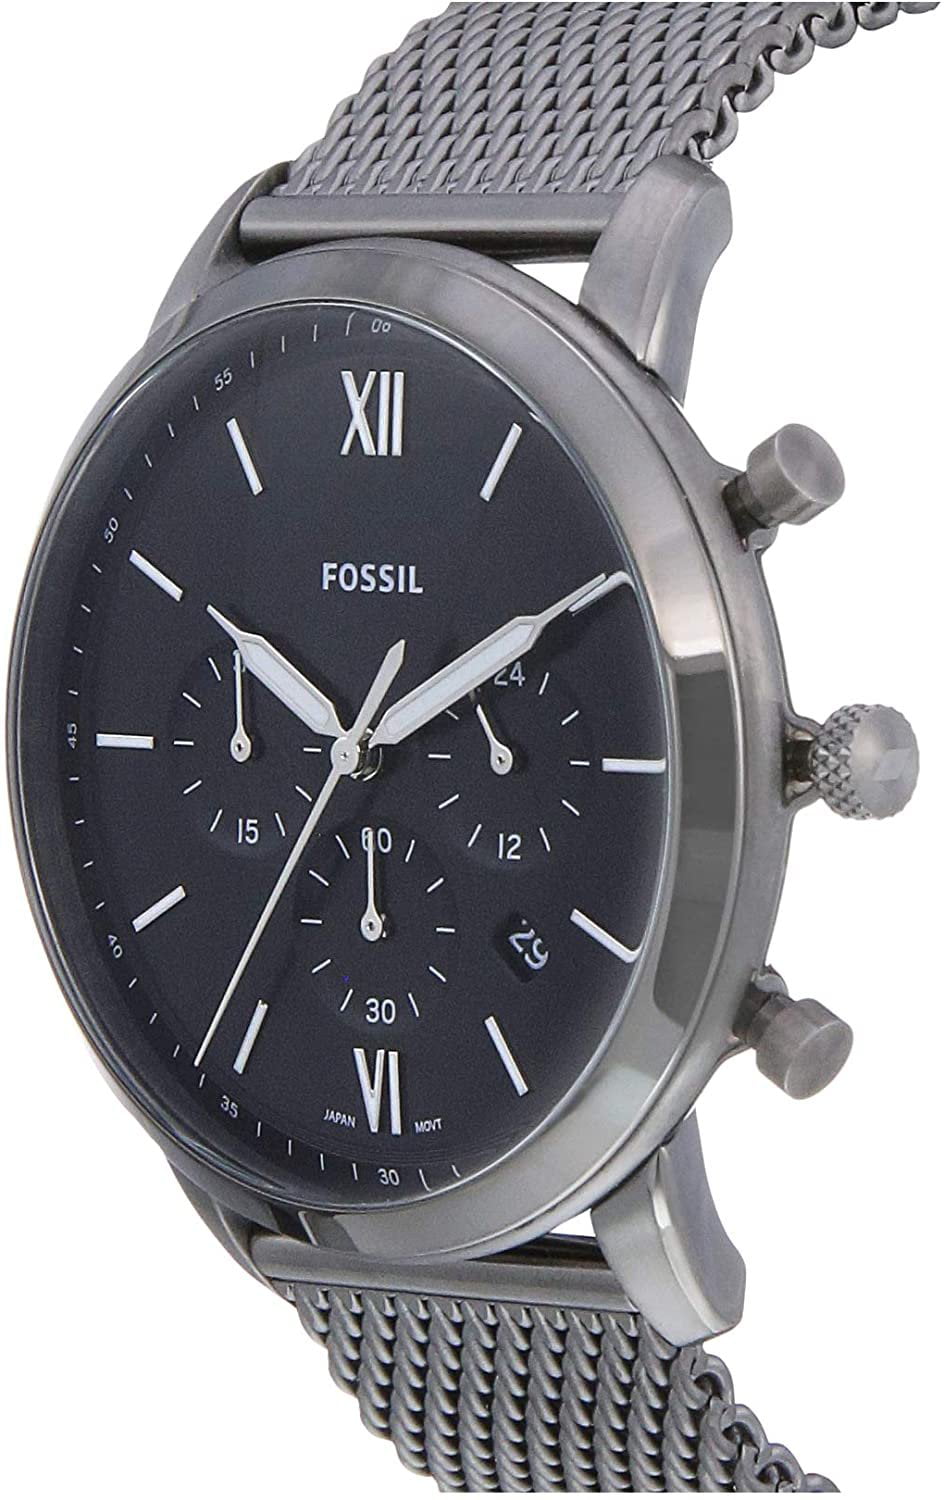 Fossil Men\'s Neutra Chronograph, Stainless FS5380 Steel Watch